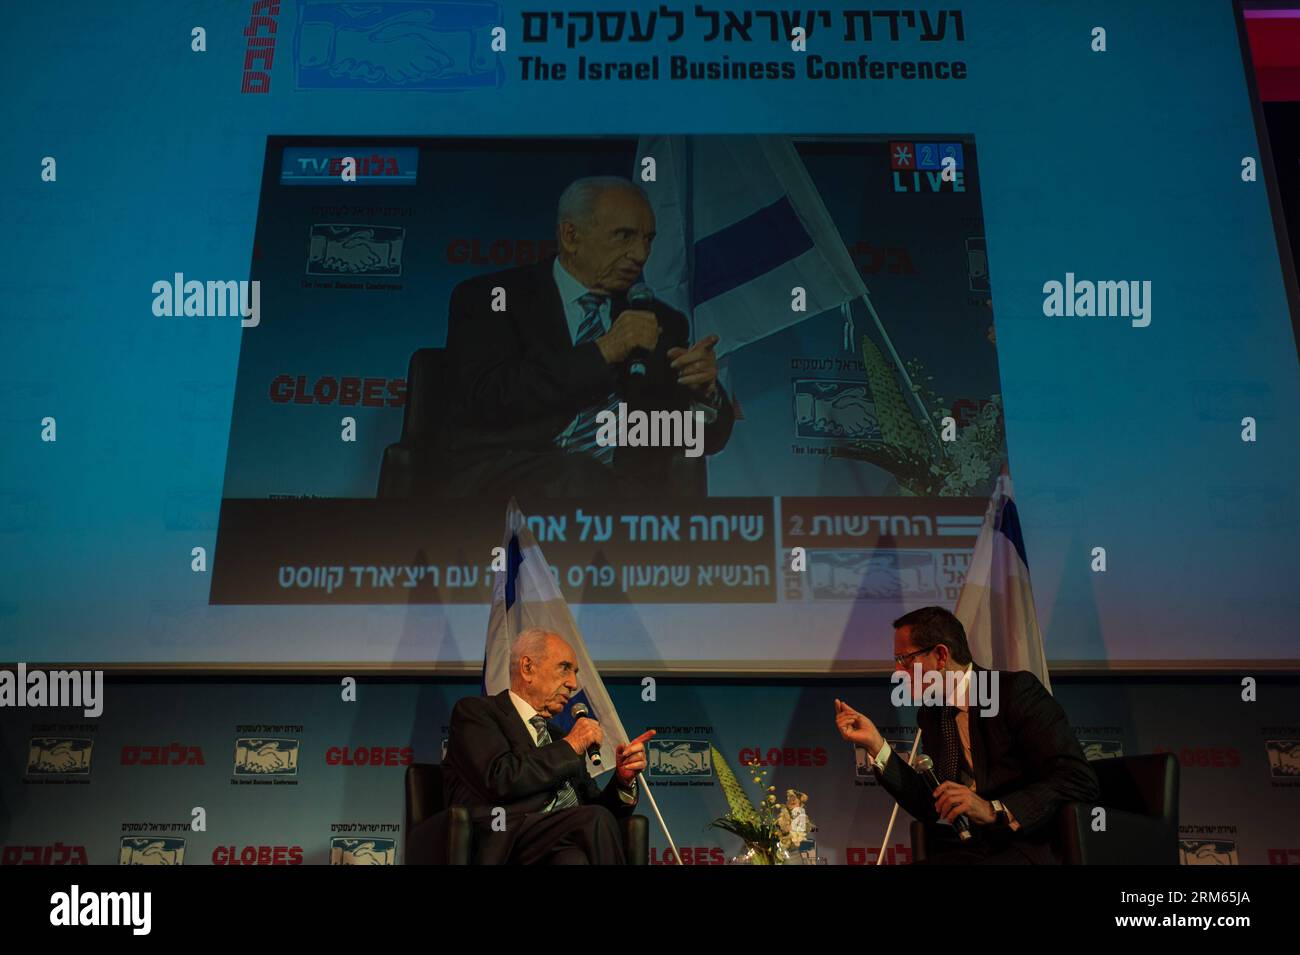 Bildnummer: 60810298 Datum: 08.12.2013 Copyright: imago/Xinhua Israeli  President Shimon Peres (L) is interviewed live by the U.S. Cable News  Network (CNN) journalist and TV host Richard Quest at the opening ceremony  of